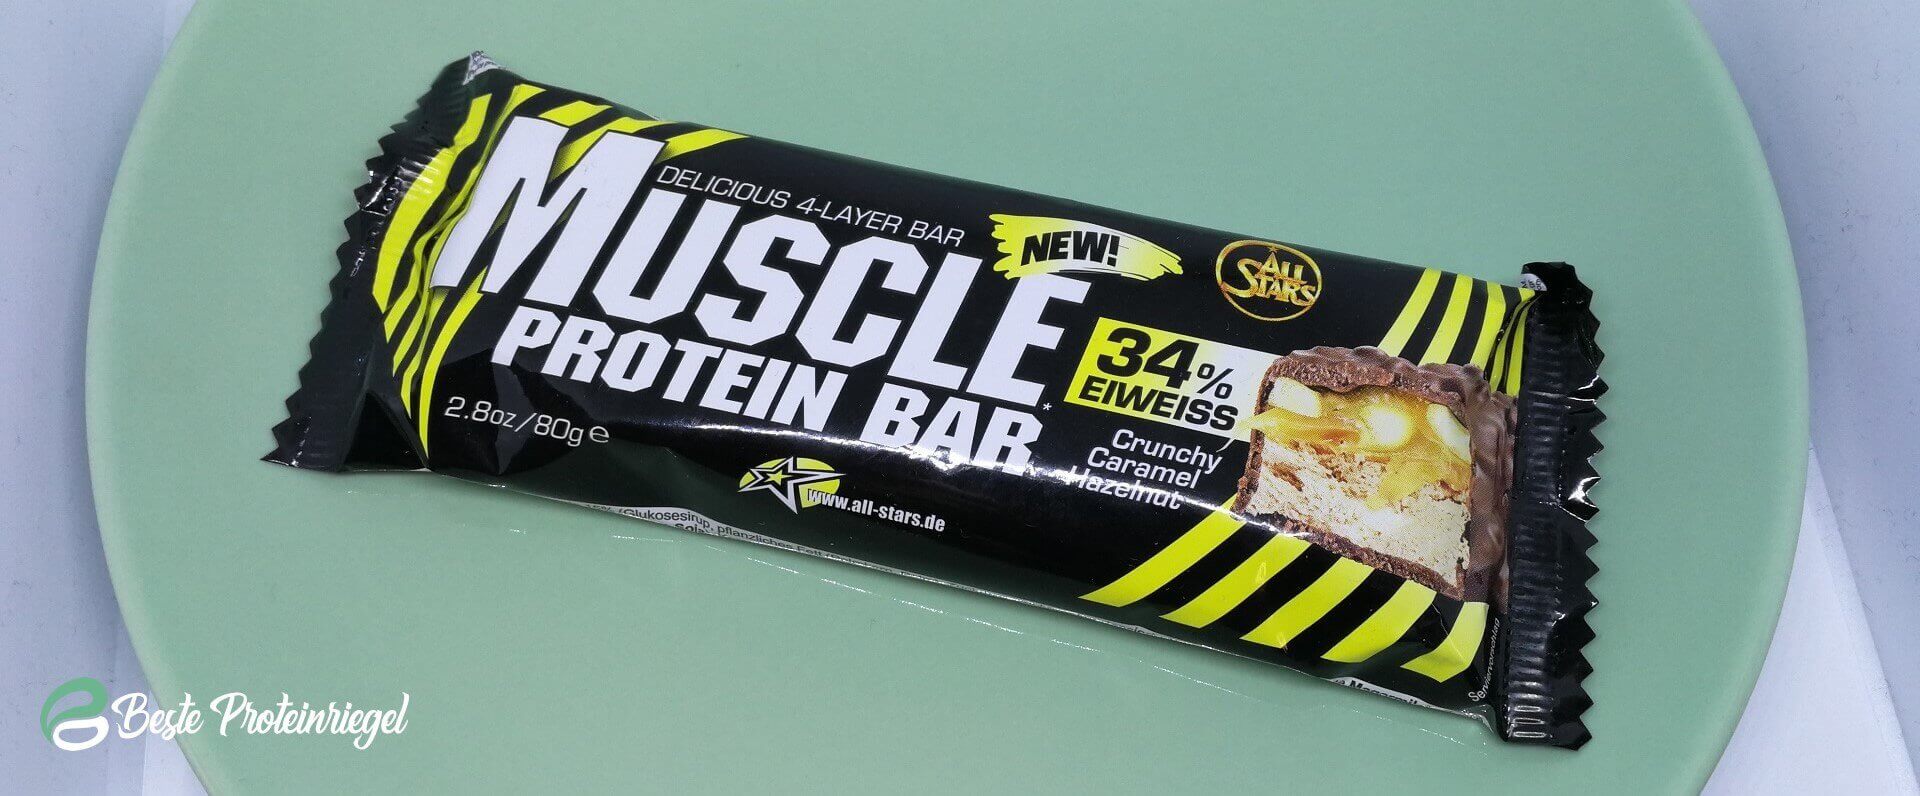 All Stars Muscle Protein Bar Testbericht